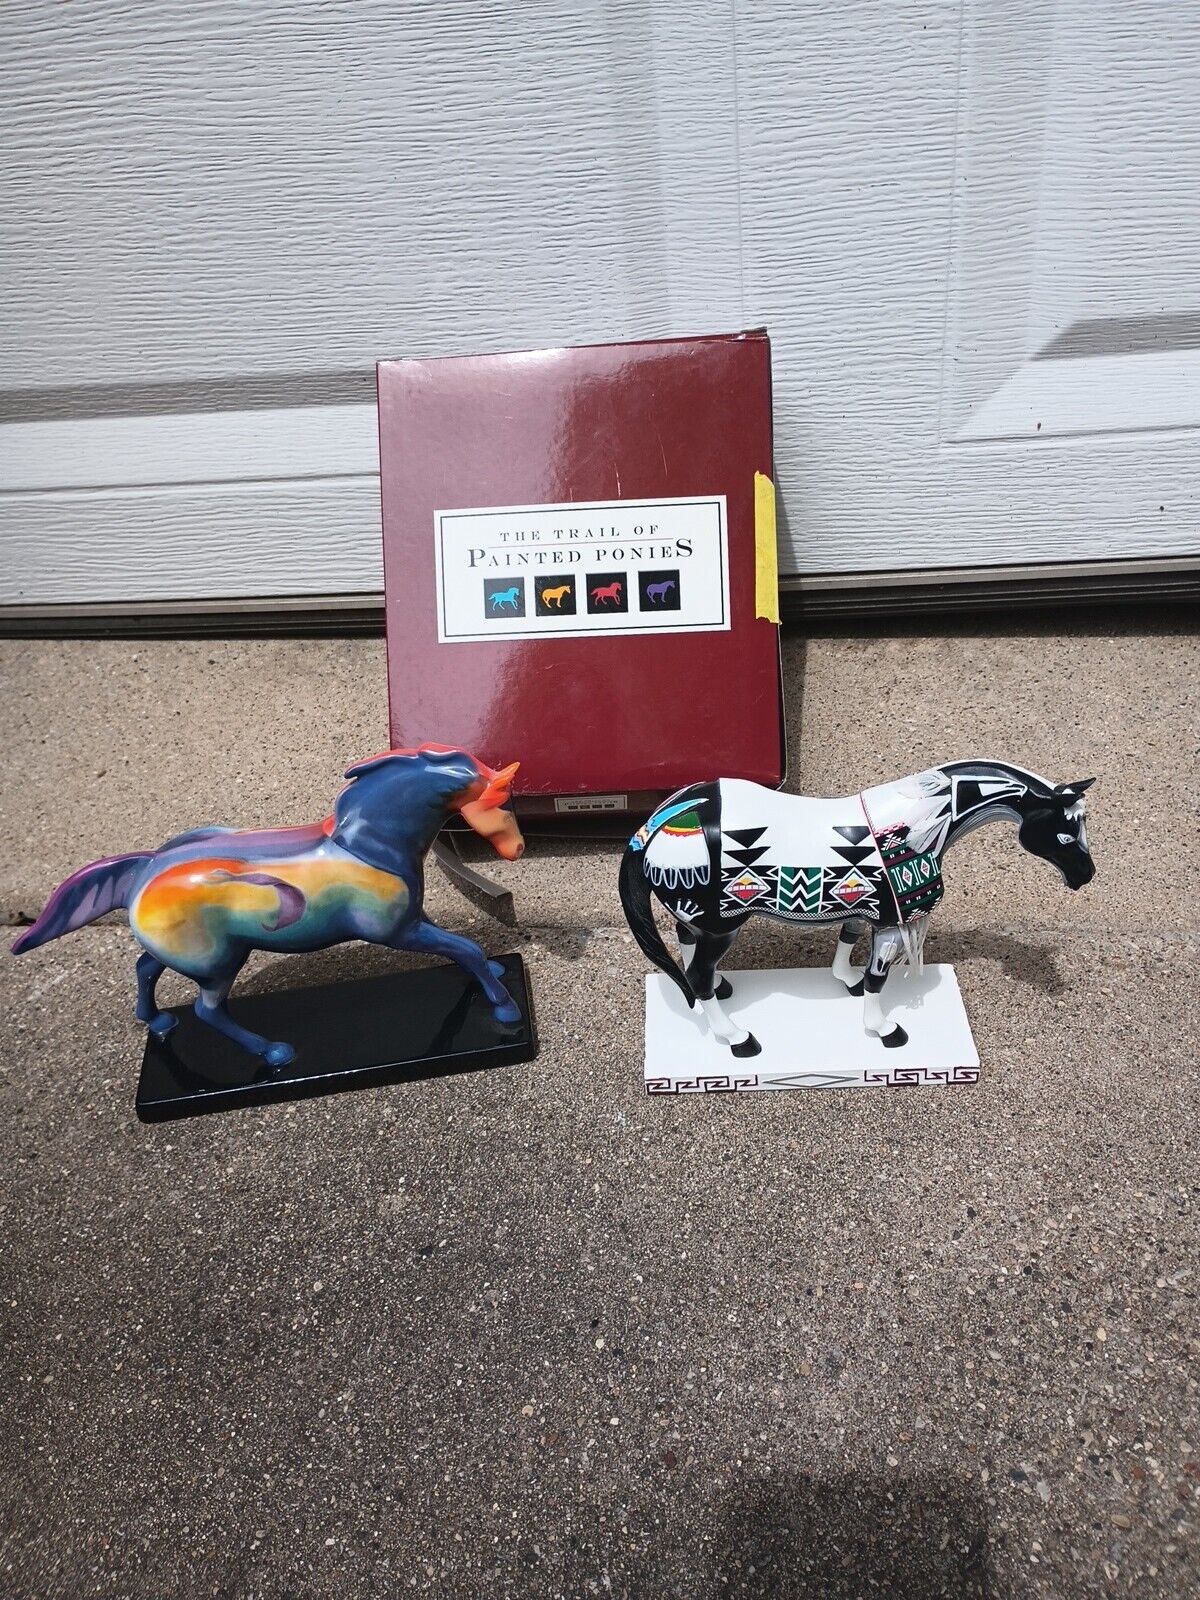 2 Trail of Painted Ponies # 1546 &1467  Horses 2004, 2003